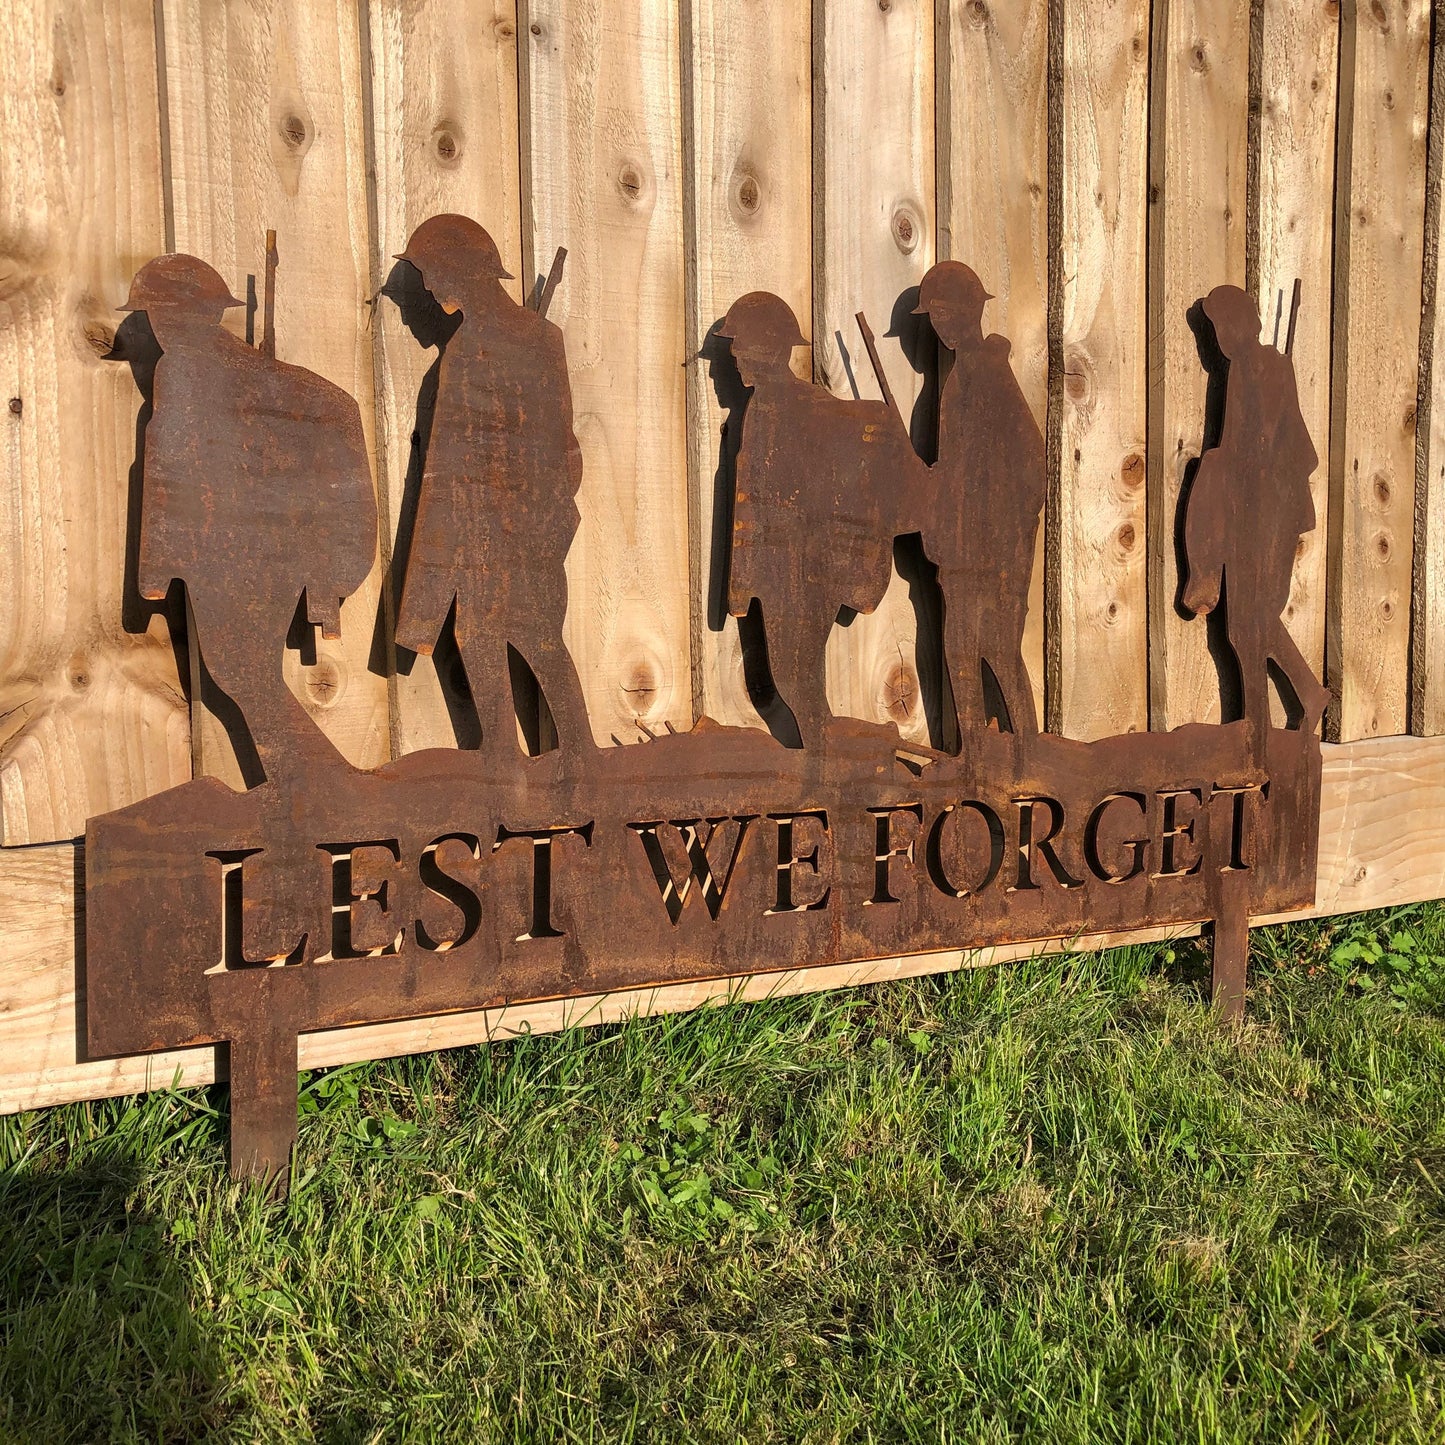 A Rusty Metal Lest We Forget Soldier Scene Garden Decoration